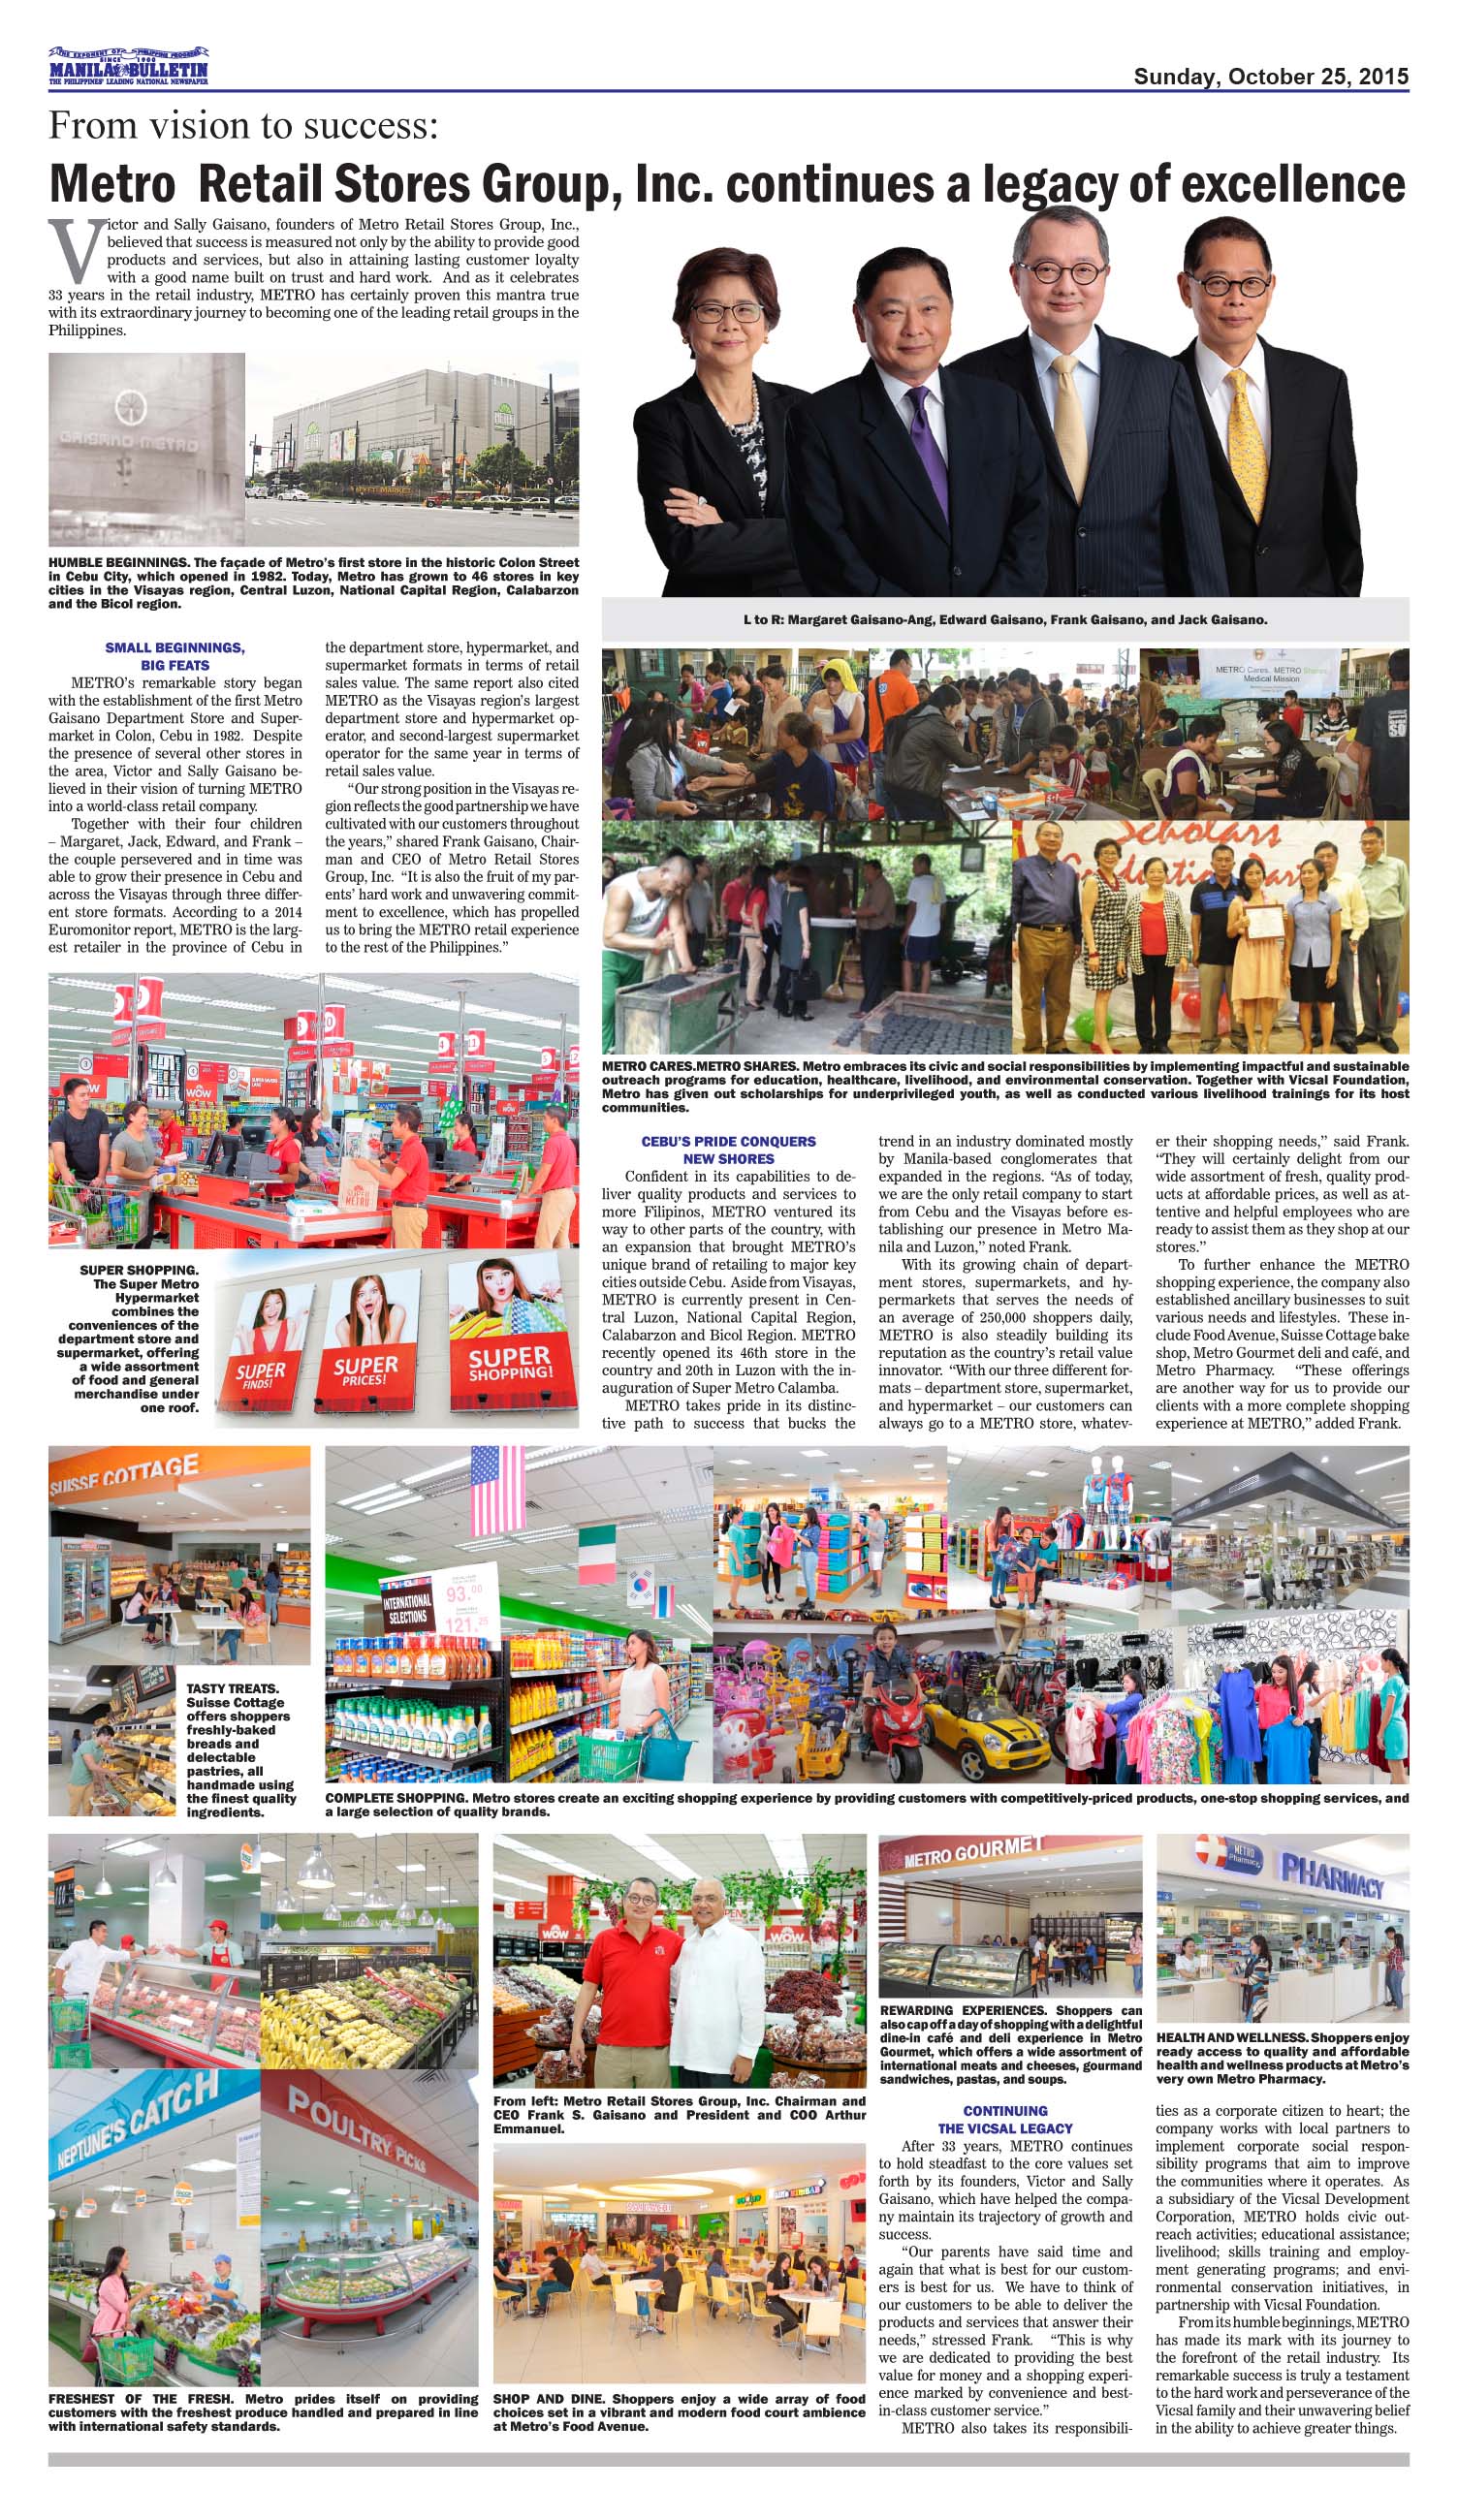 From vision to success Metro Retail Stores Group Inc. continues a legacy of excellence Manila Bulletin